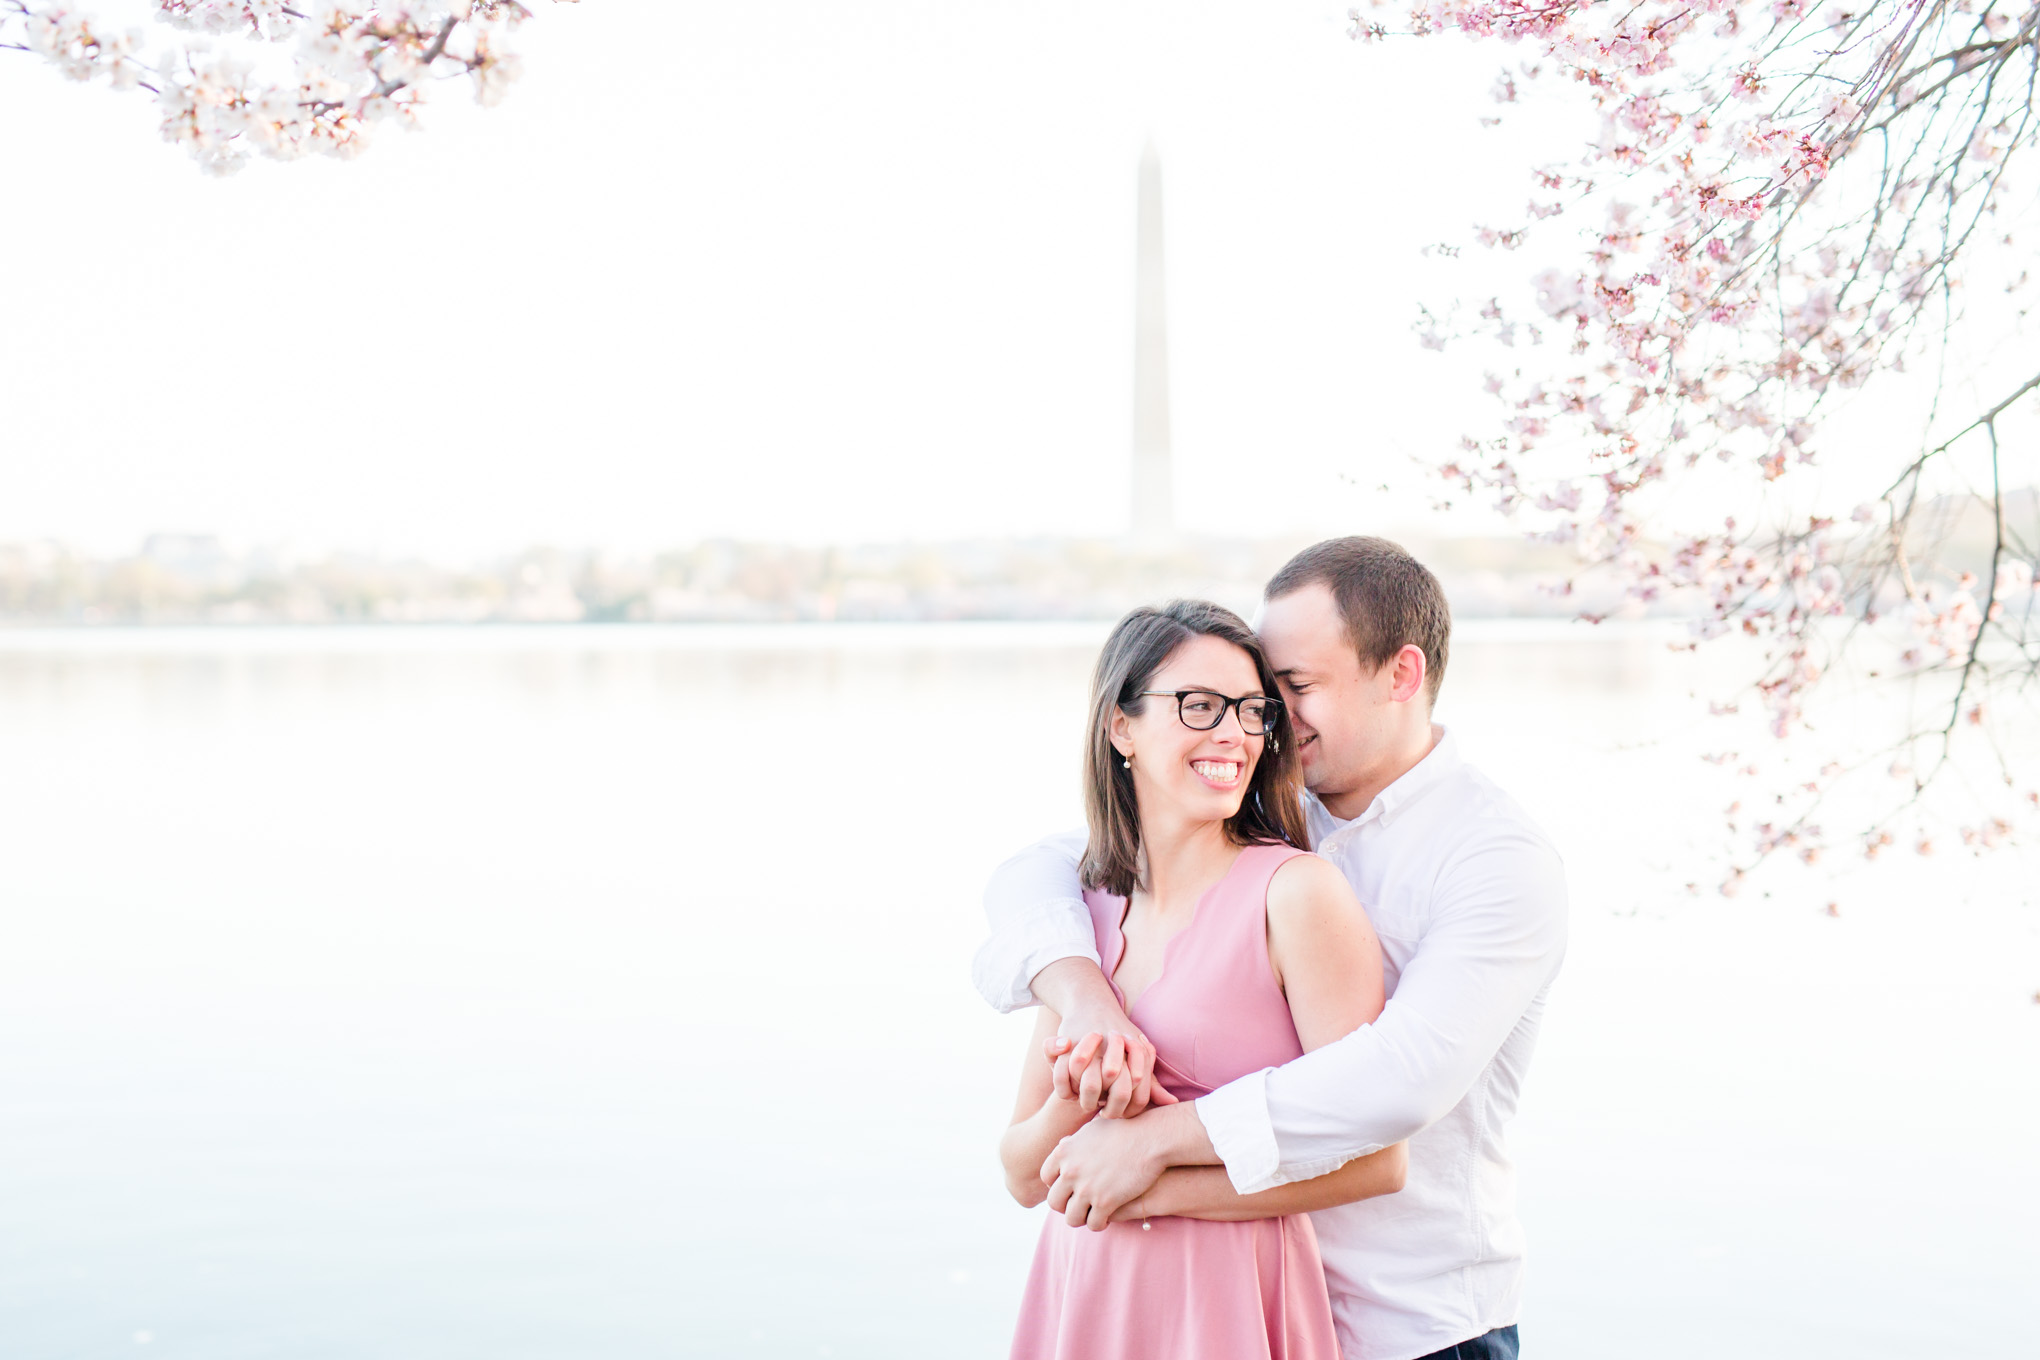 sunny cherry blossoms engagement session, Washington, D.C. engagement photos, Washington D.C. engagement photos, sunrrise engagement photos, cherry blossom engagement photos, D.C. cherry bloossoms, D.C. cherry blossoms photos, cherry blossom photos, cherry blossoms portrraits, sunny engagement photos, classic engagement photos, Rachel E.H. Photography, engagement session style, couple snuggling, Washington Monument